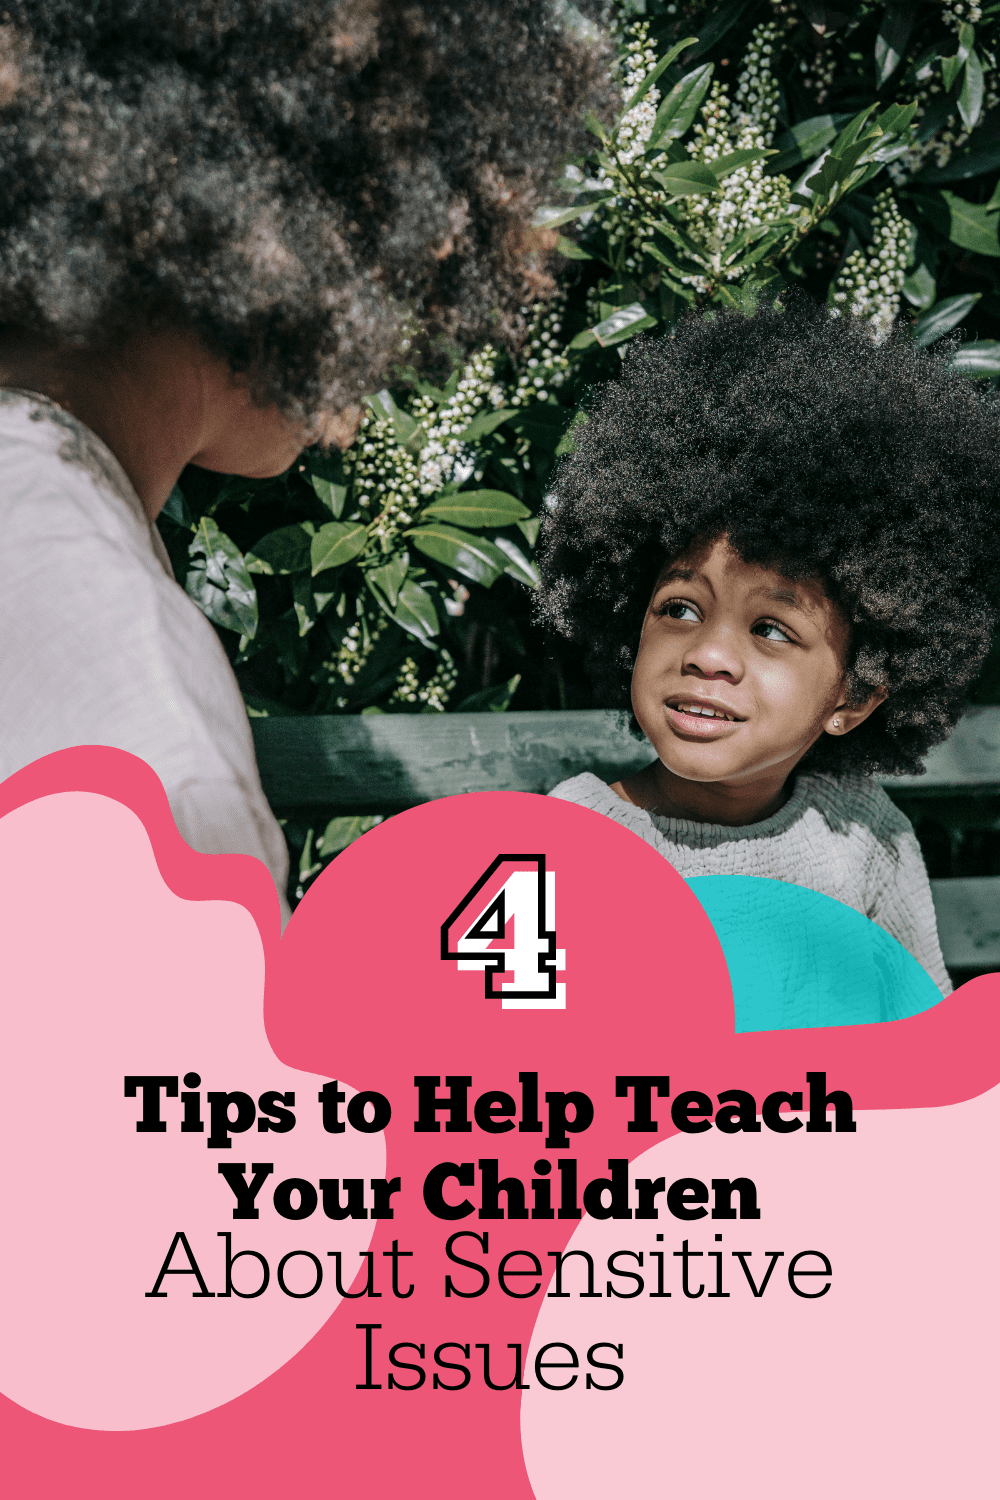 4 Tips to Help Teach Your Children About Sensitive Issues